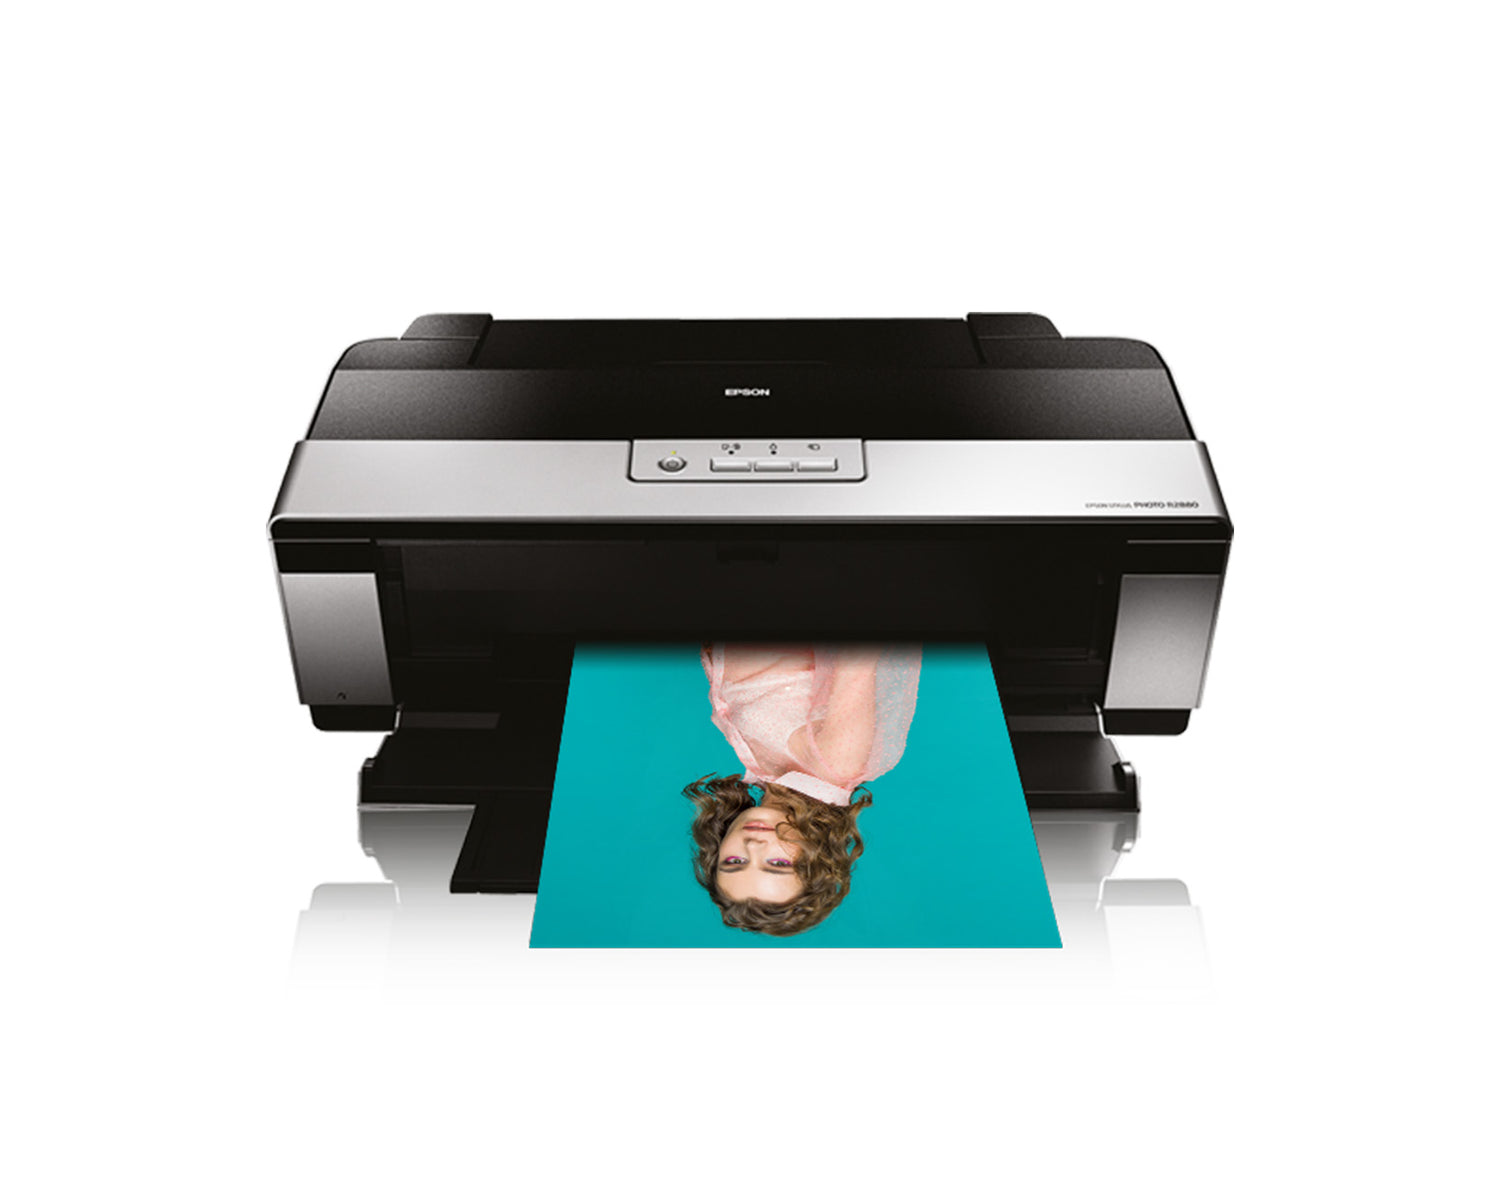 Print – from digital files to paper